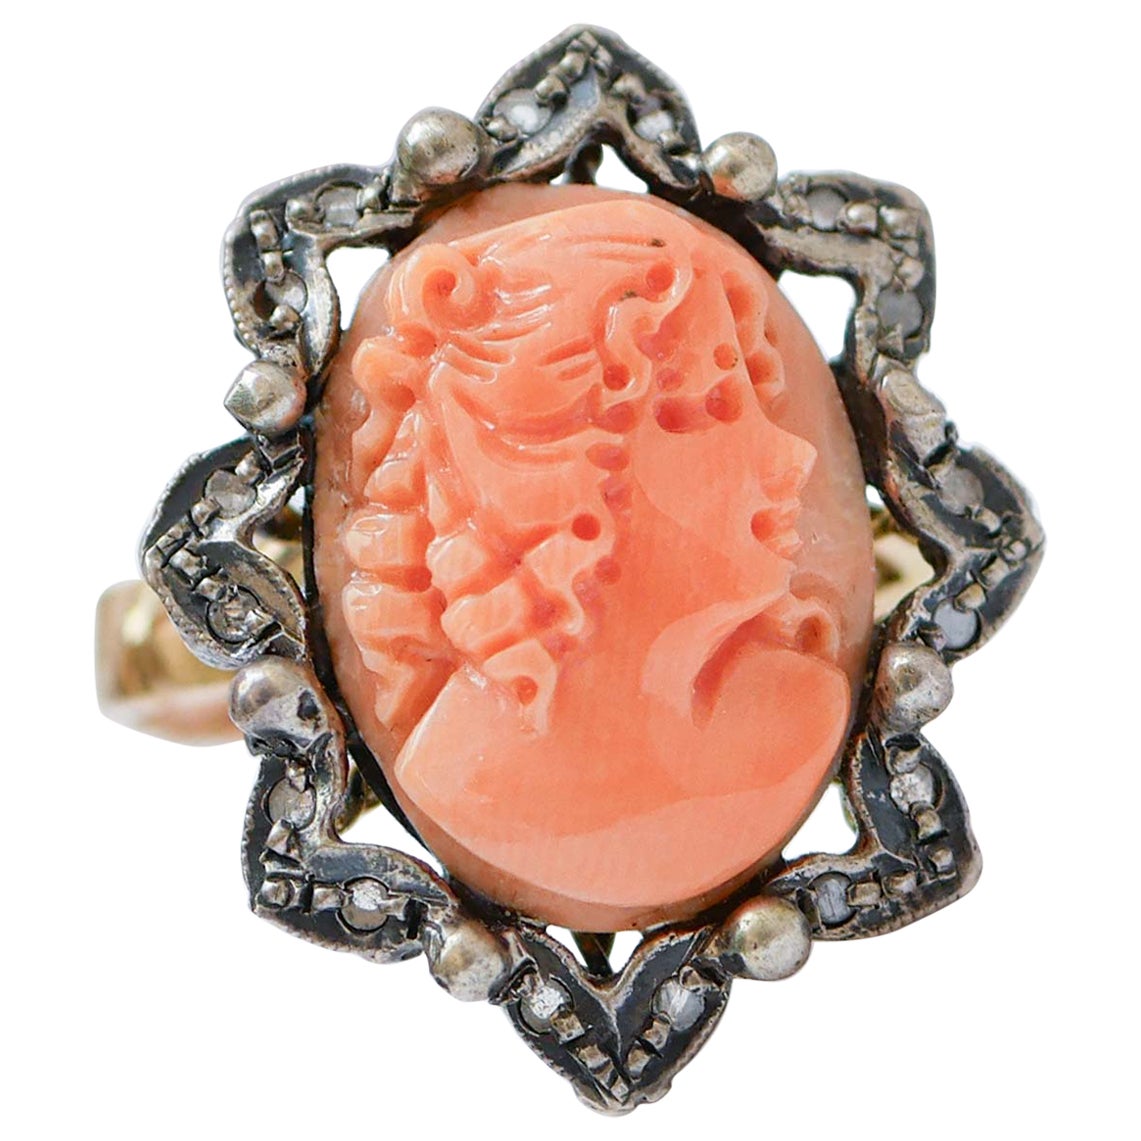 Coral, Diamonds, Rose Gold and Silver Ring.